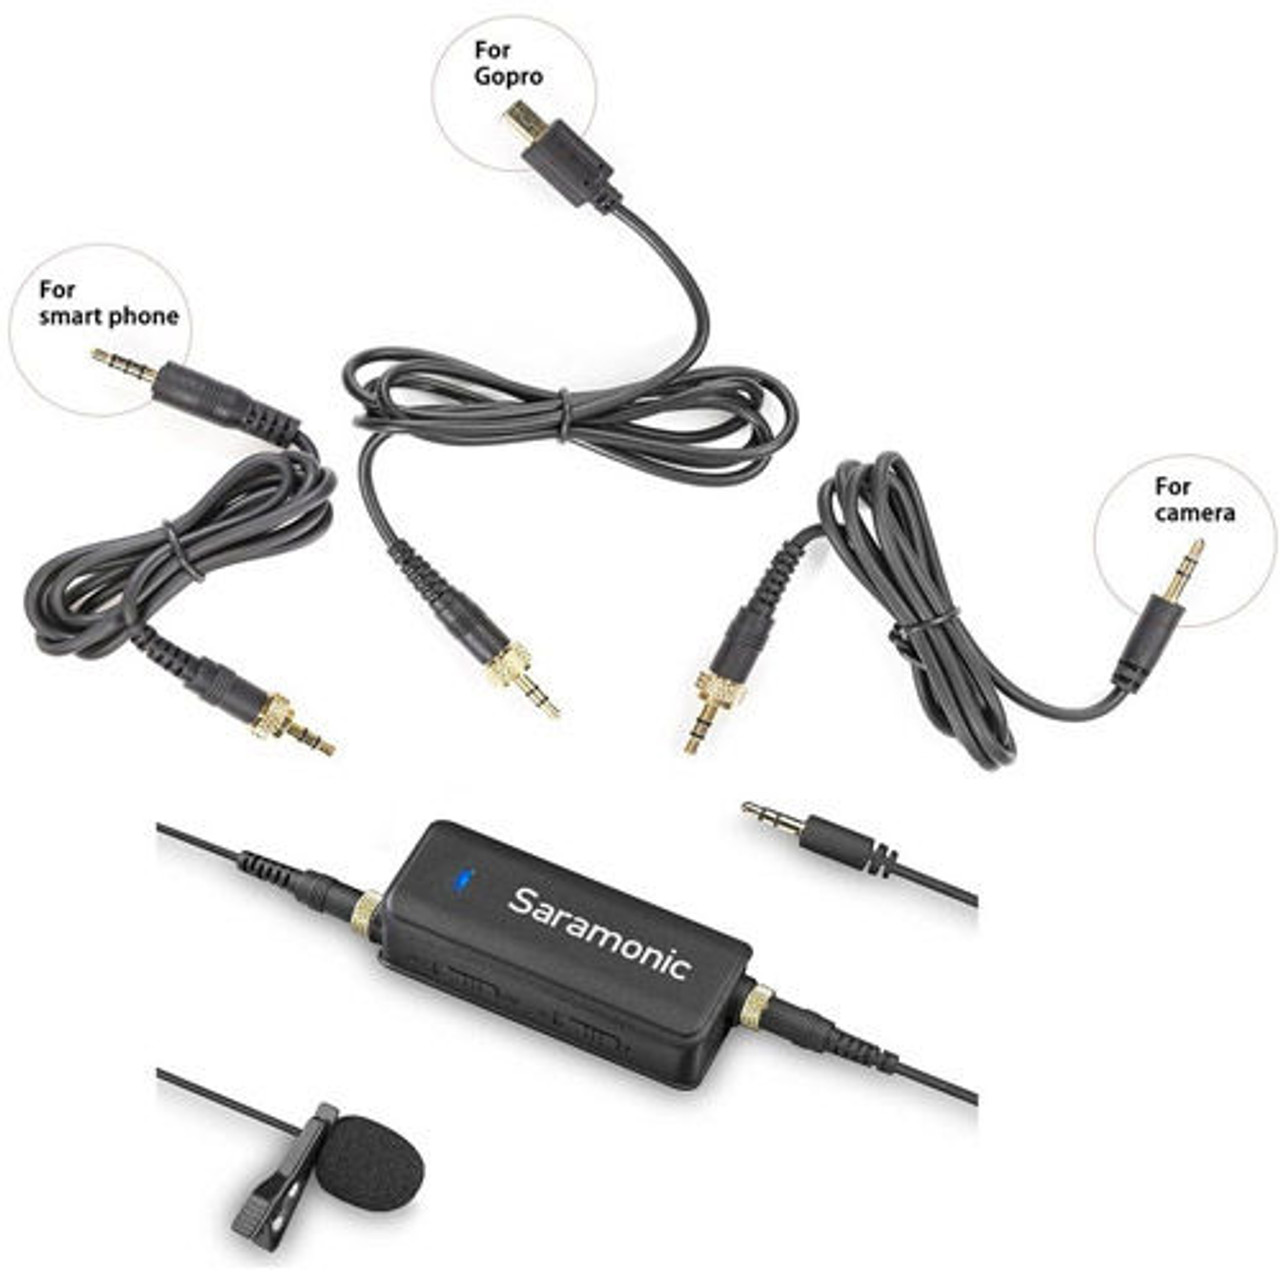 Saramonic LavMic Dual Channels Audio Mixer with Lavalier Mic Kit for DSLR & GoPro Cameras and iOS Devices